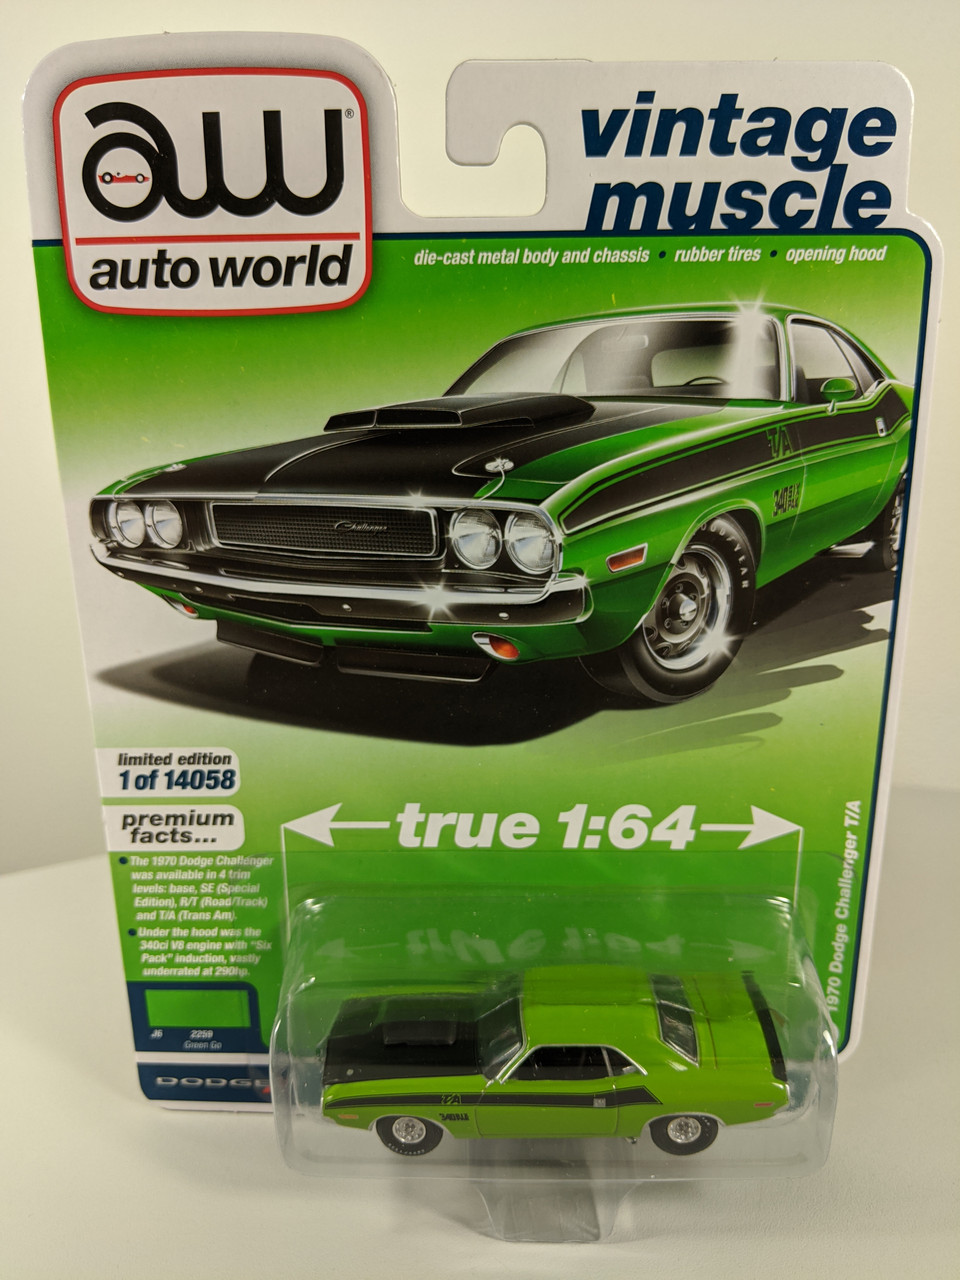 AUTO WORLD R28 Class of '70 Dodge Challenger T/A Lime Green 